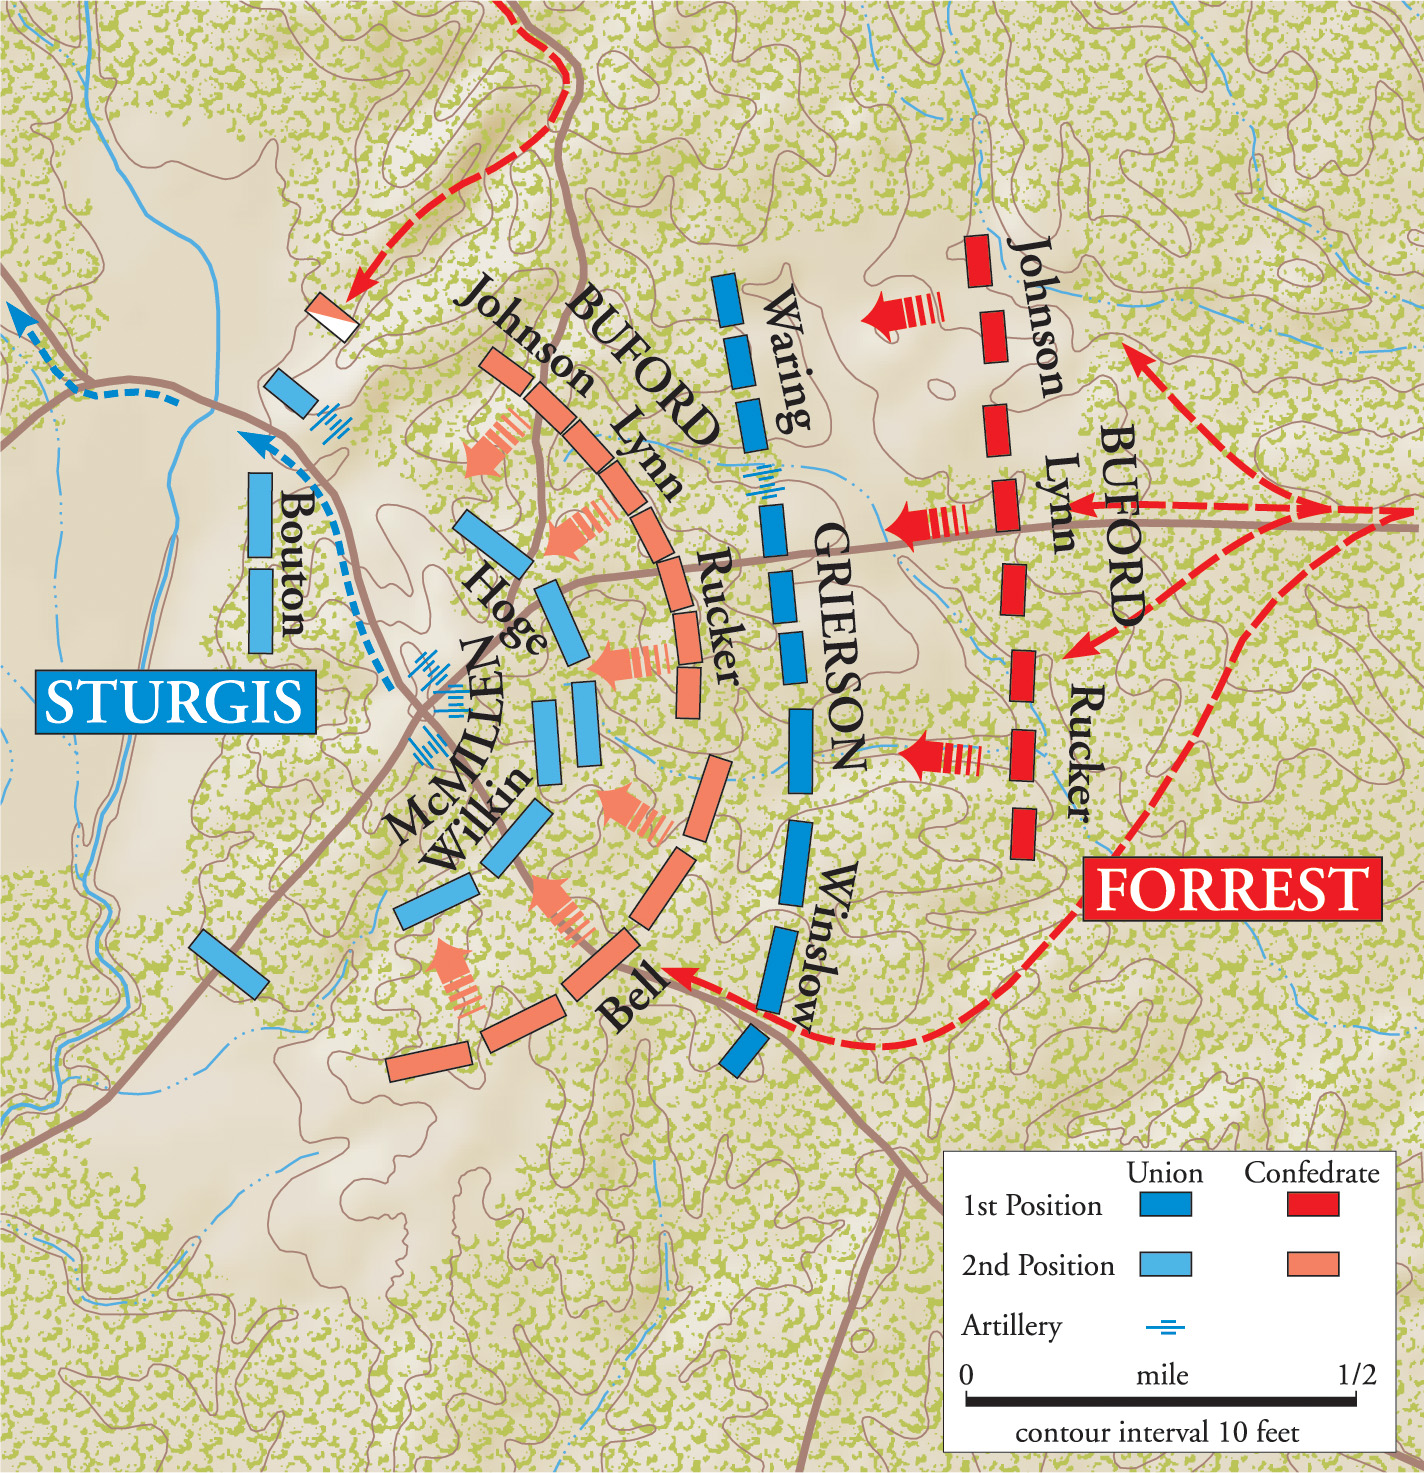 Forrest fought aggressively to mask his small numbers. His dismounted troopers assaulted both flanks of the Union army while his artillery shelled the Federal center.